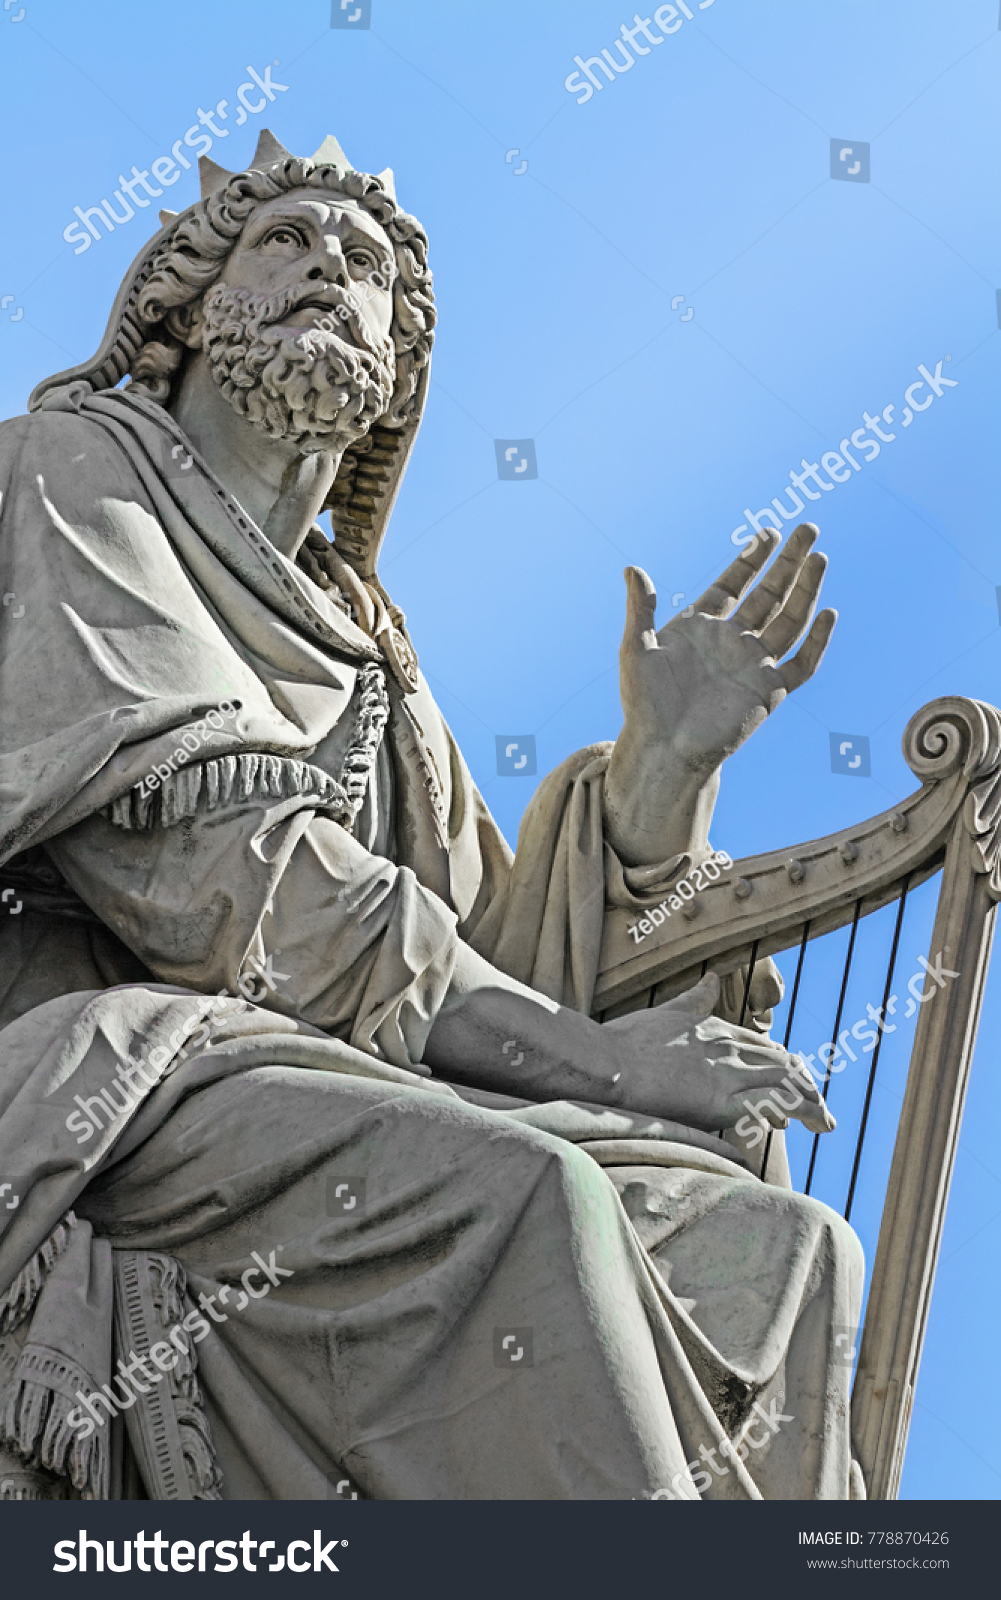 Statue of the King David on the base of  a Column  of the Immaculate Conception, Rome, Italy #778870426